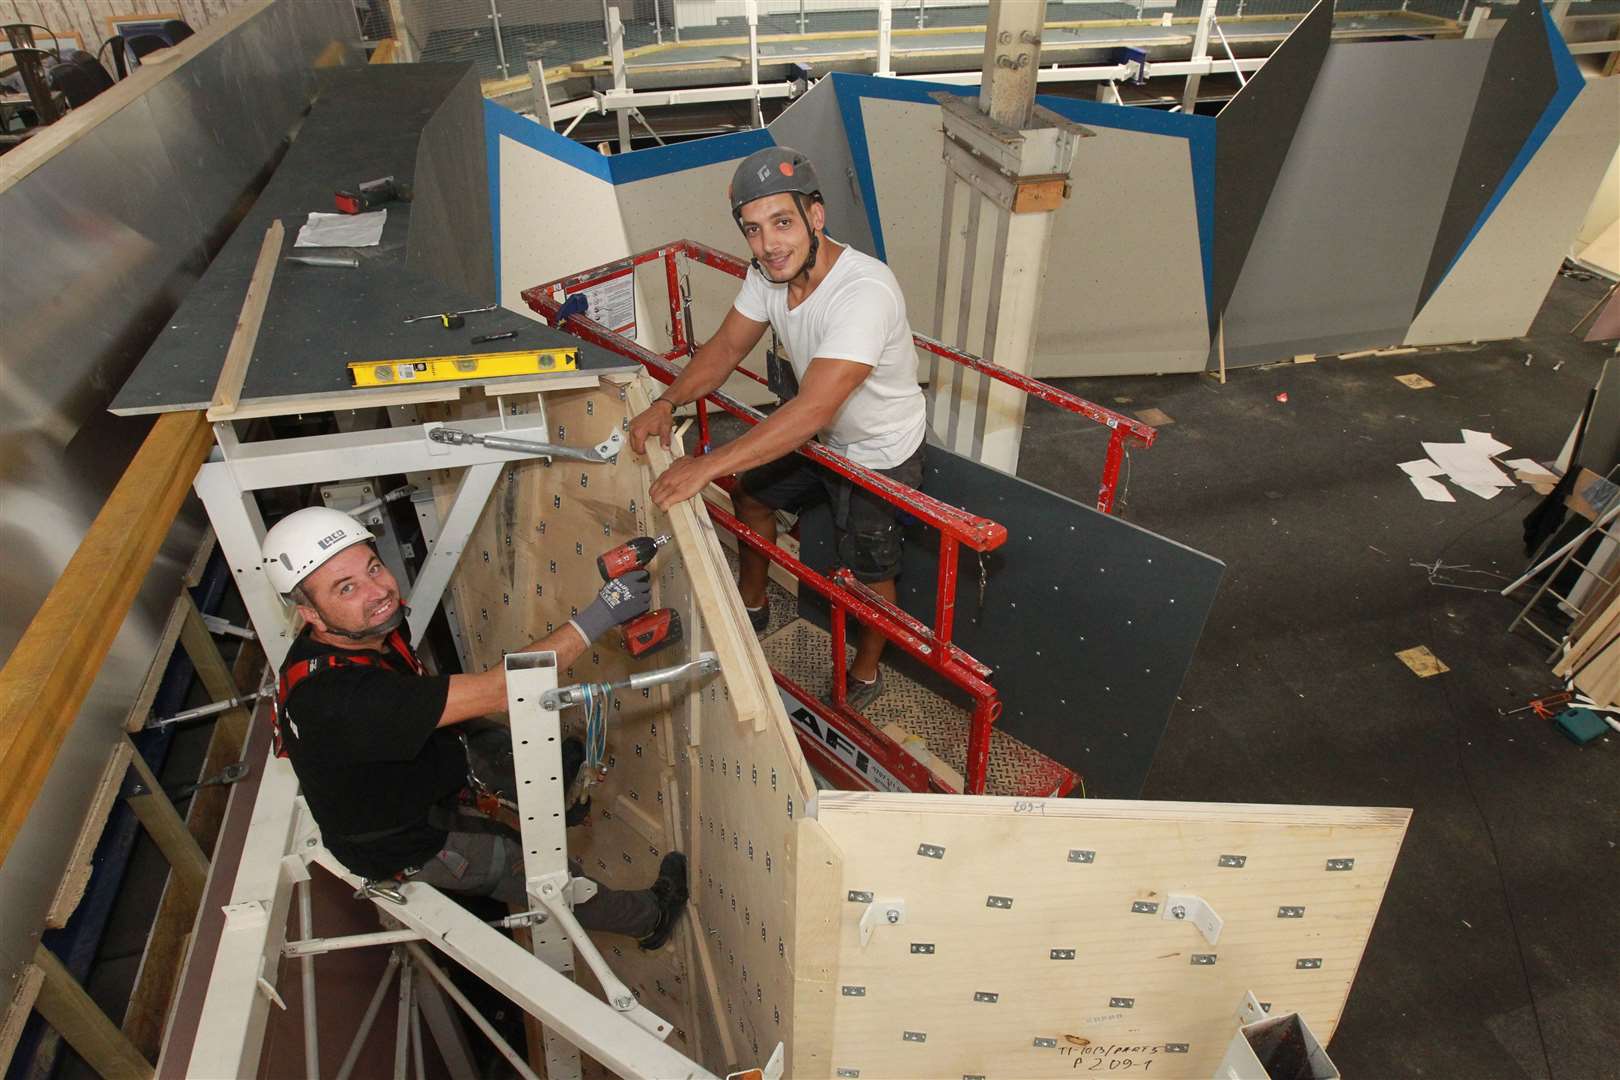 From left, Daniel Miadenov and Stoycho Grozev, from Walltopia, helping to put together climbing walls at The Climbing Experience, that is due to open next month in Maidstone. Picture: John Westhrop.